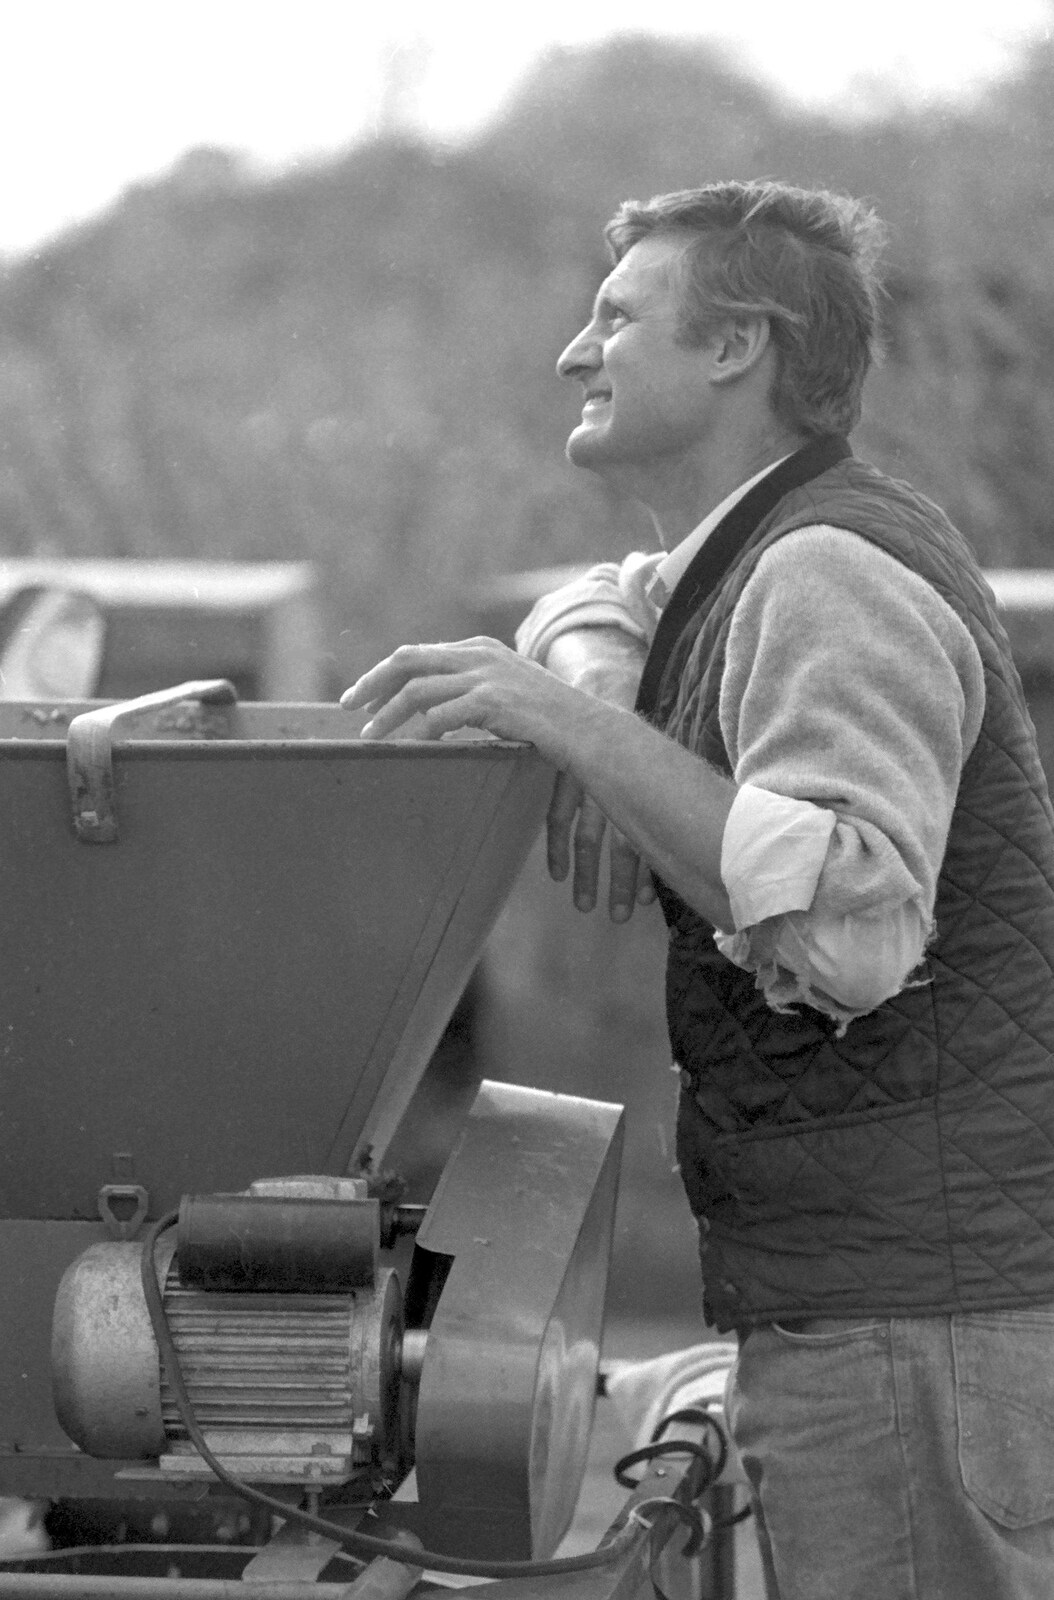 Geoff looks up from Cider Making in Black and White, Stuston, Suffolk - 11th October 1992